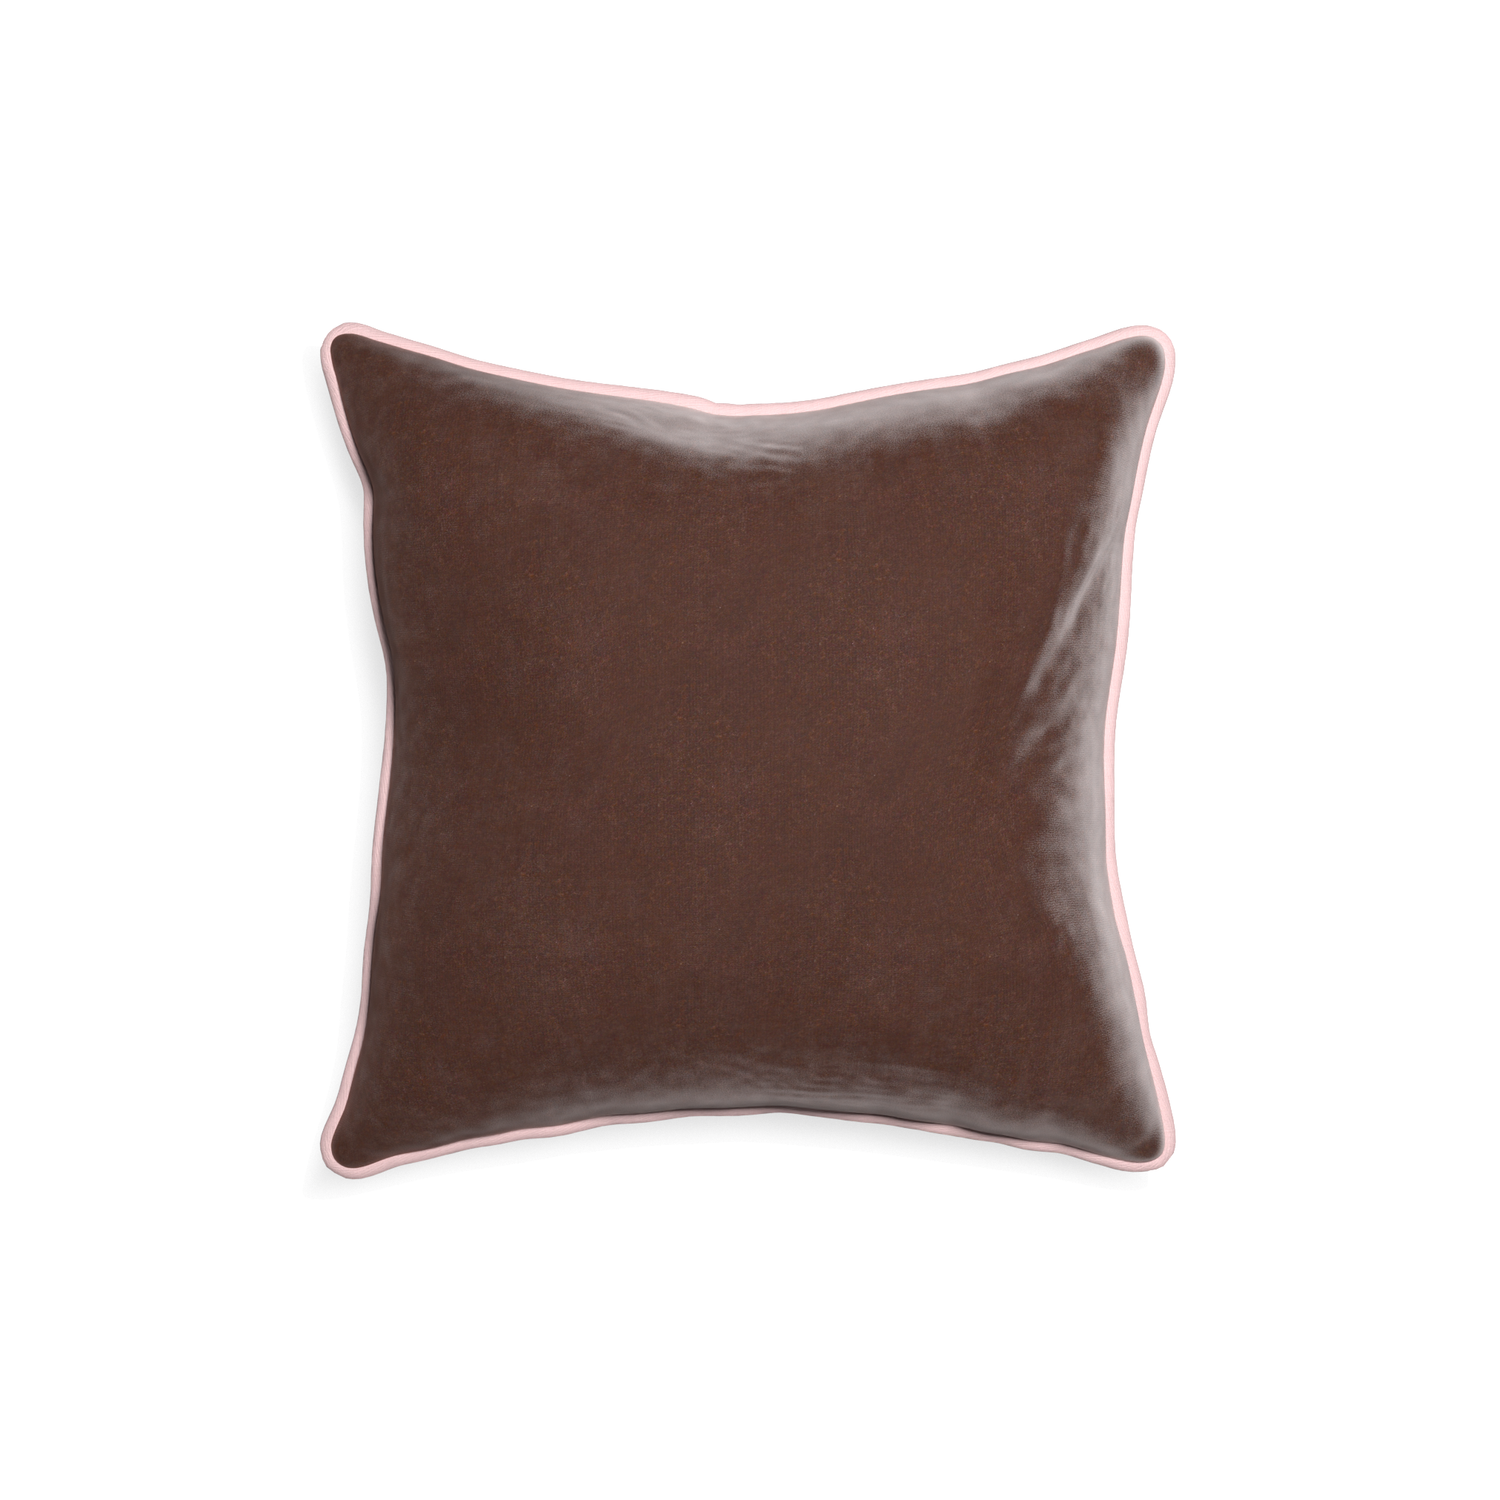 square brown velvet pillow with light pink piping